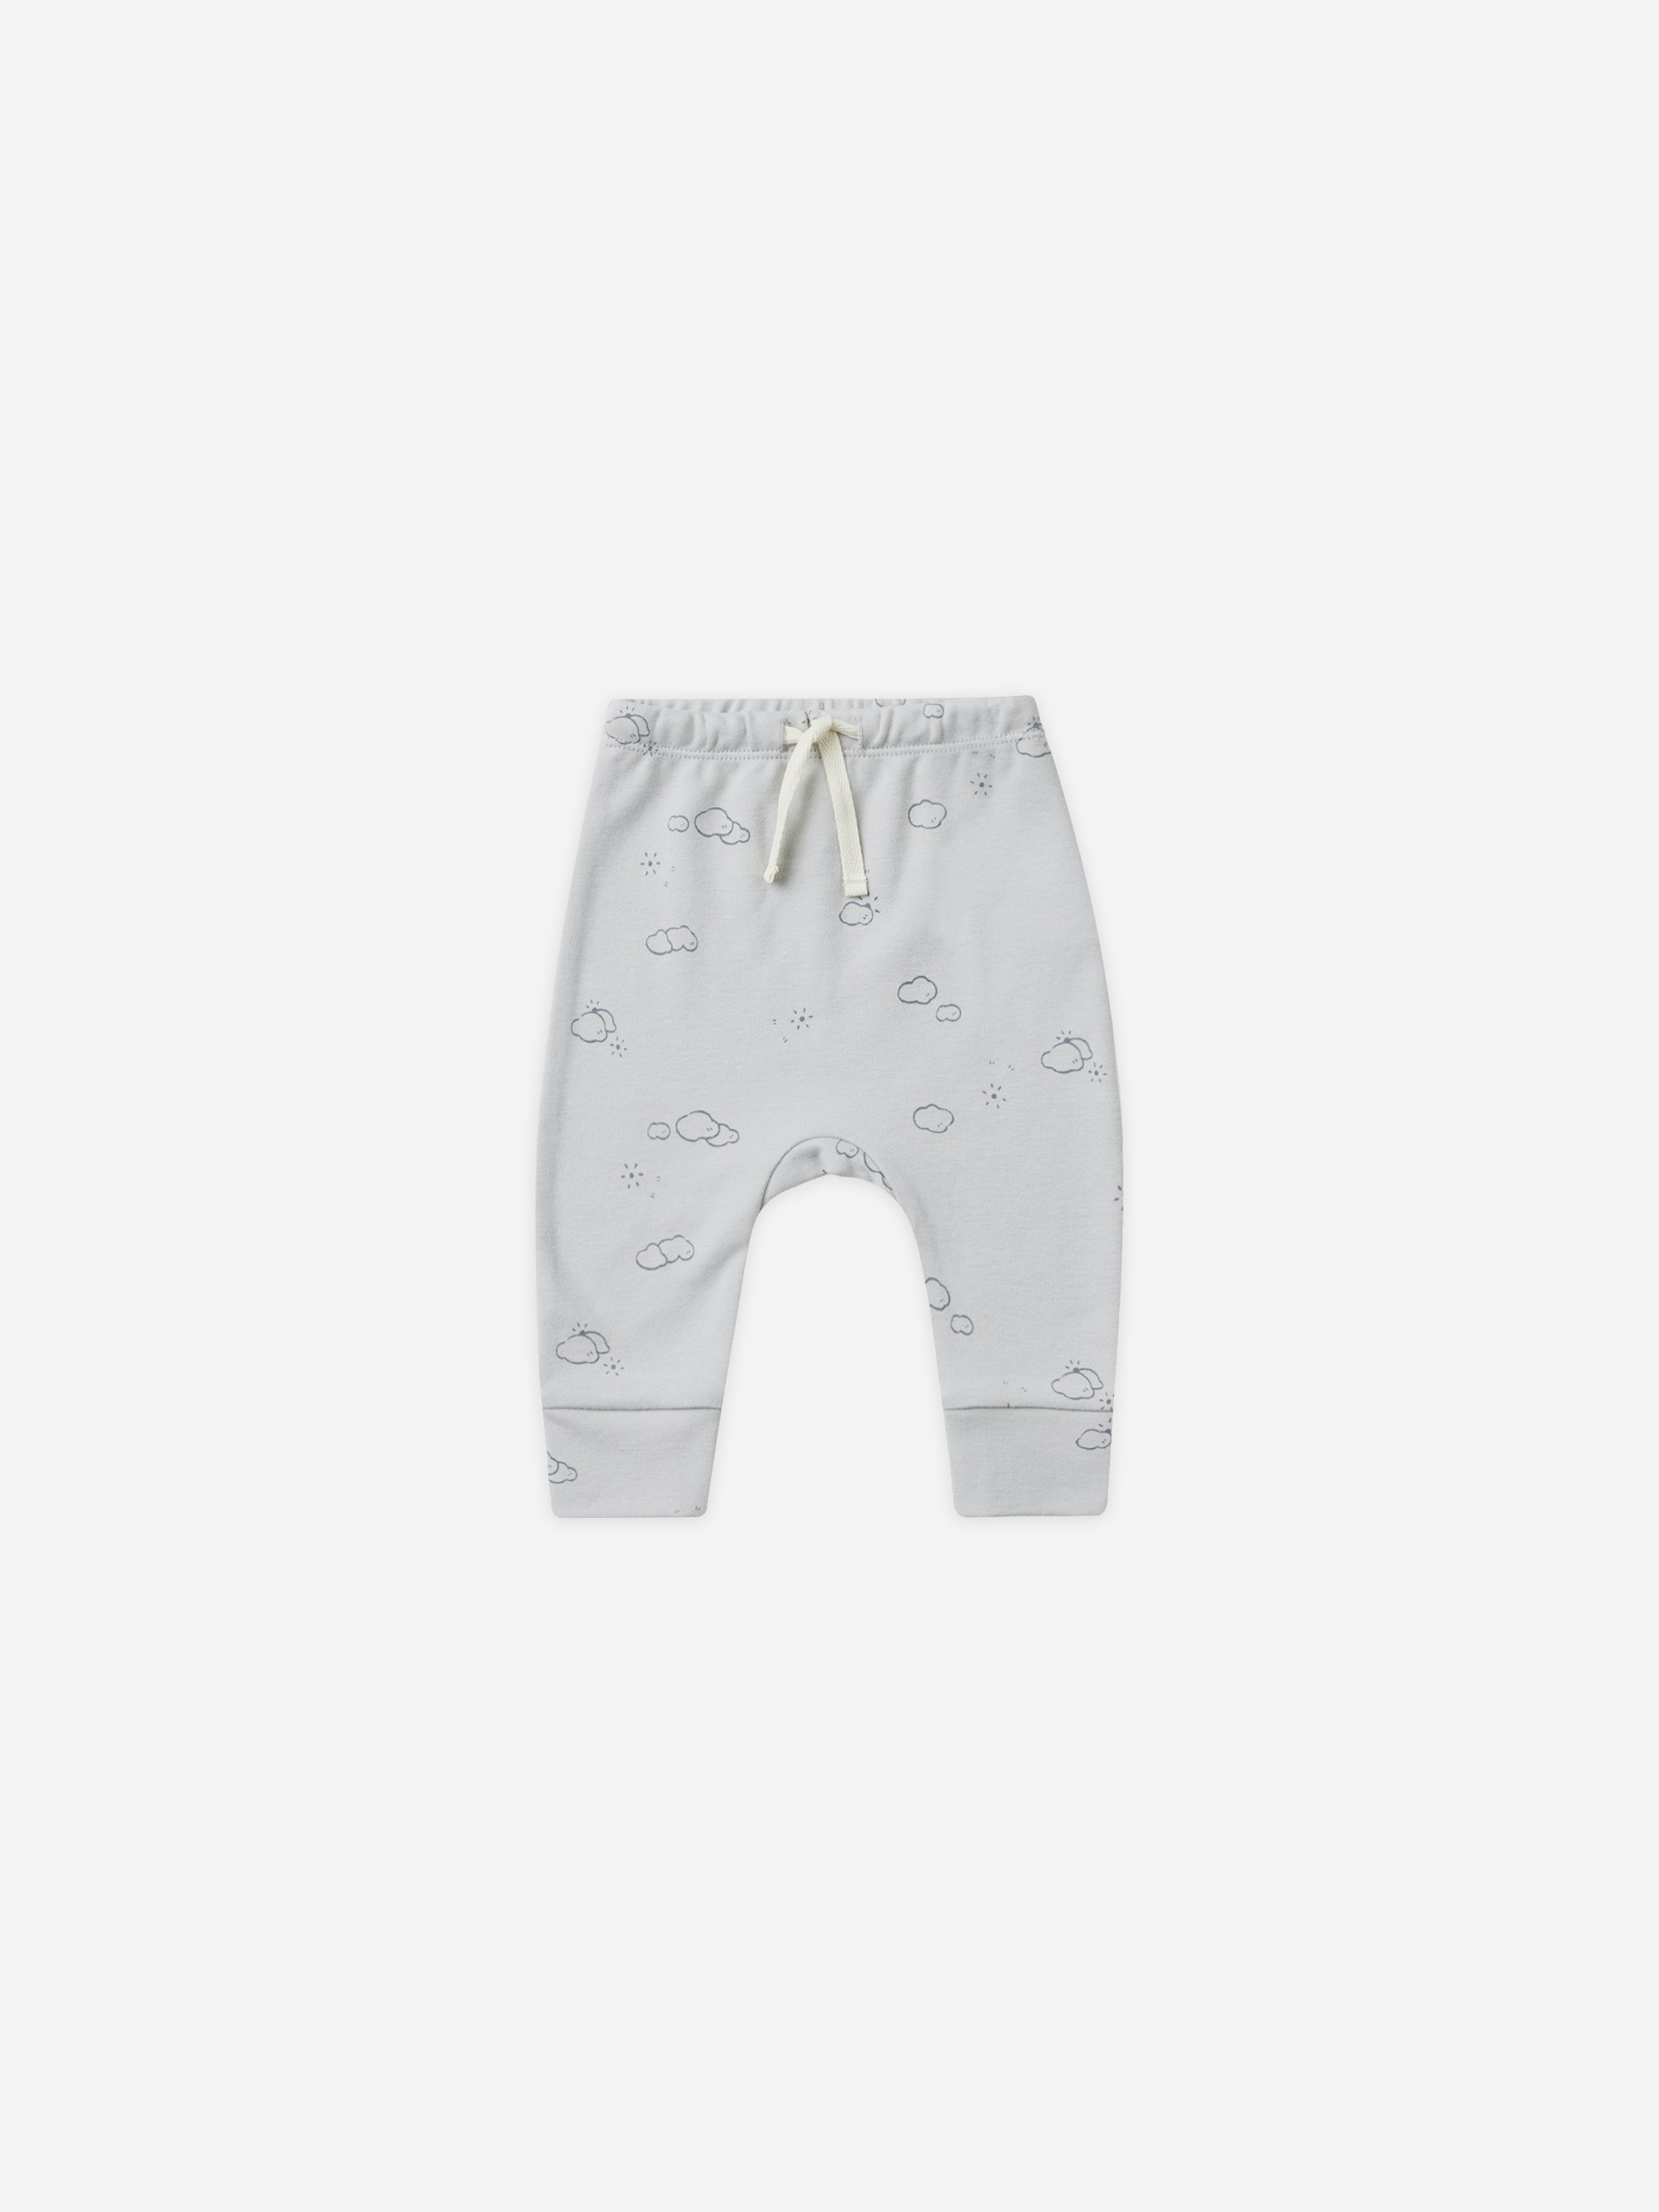 Drawstring Pant || Sunny Day - Rylee + Cru | Kids Clothes | Trendy Baby Clothes | Modern Infant Outfits |